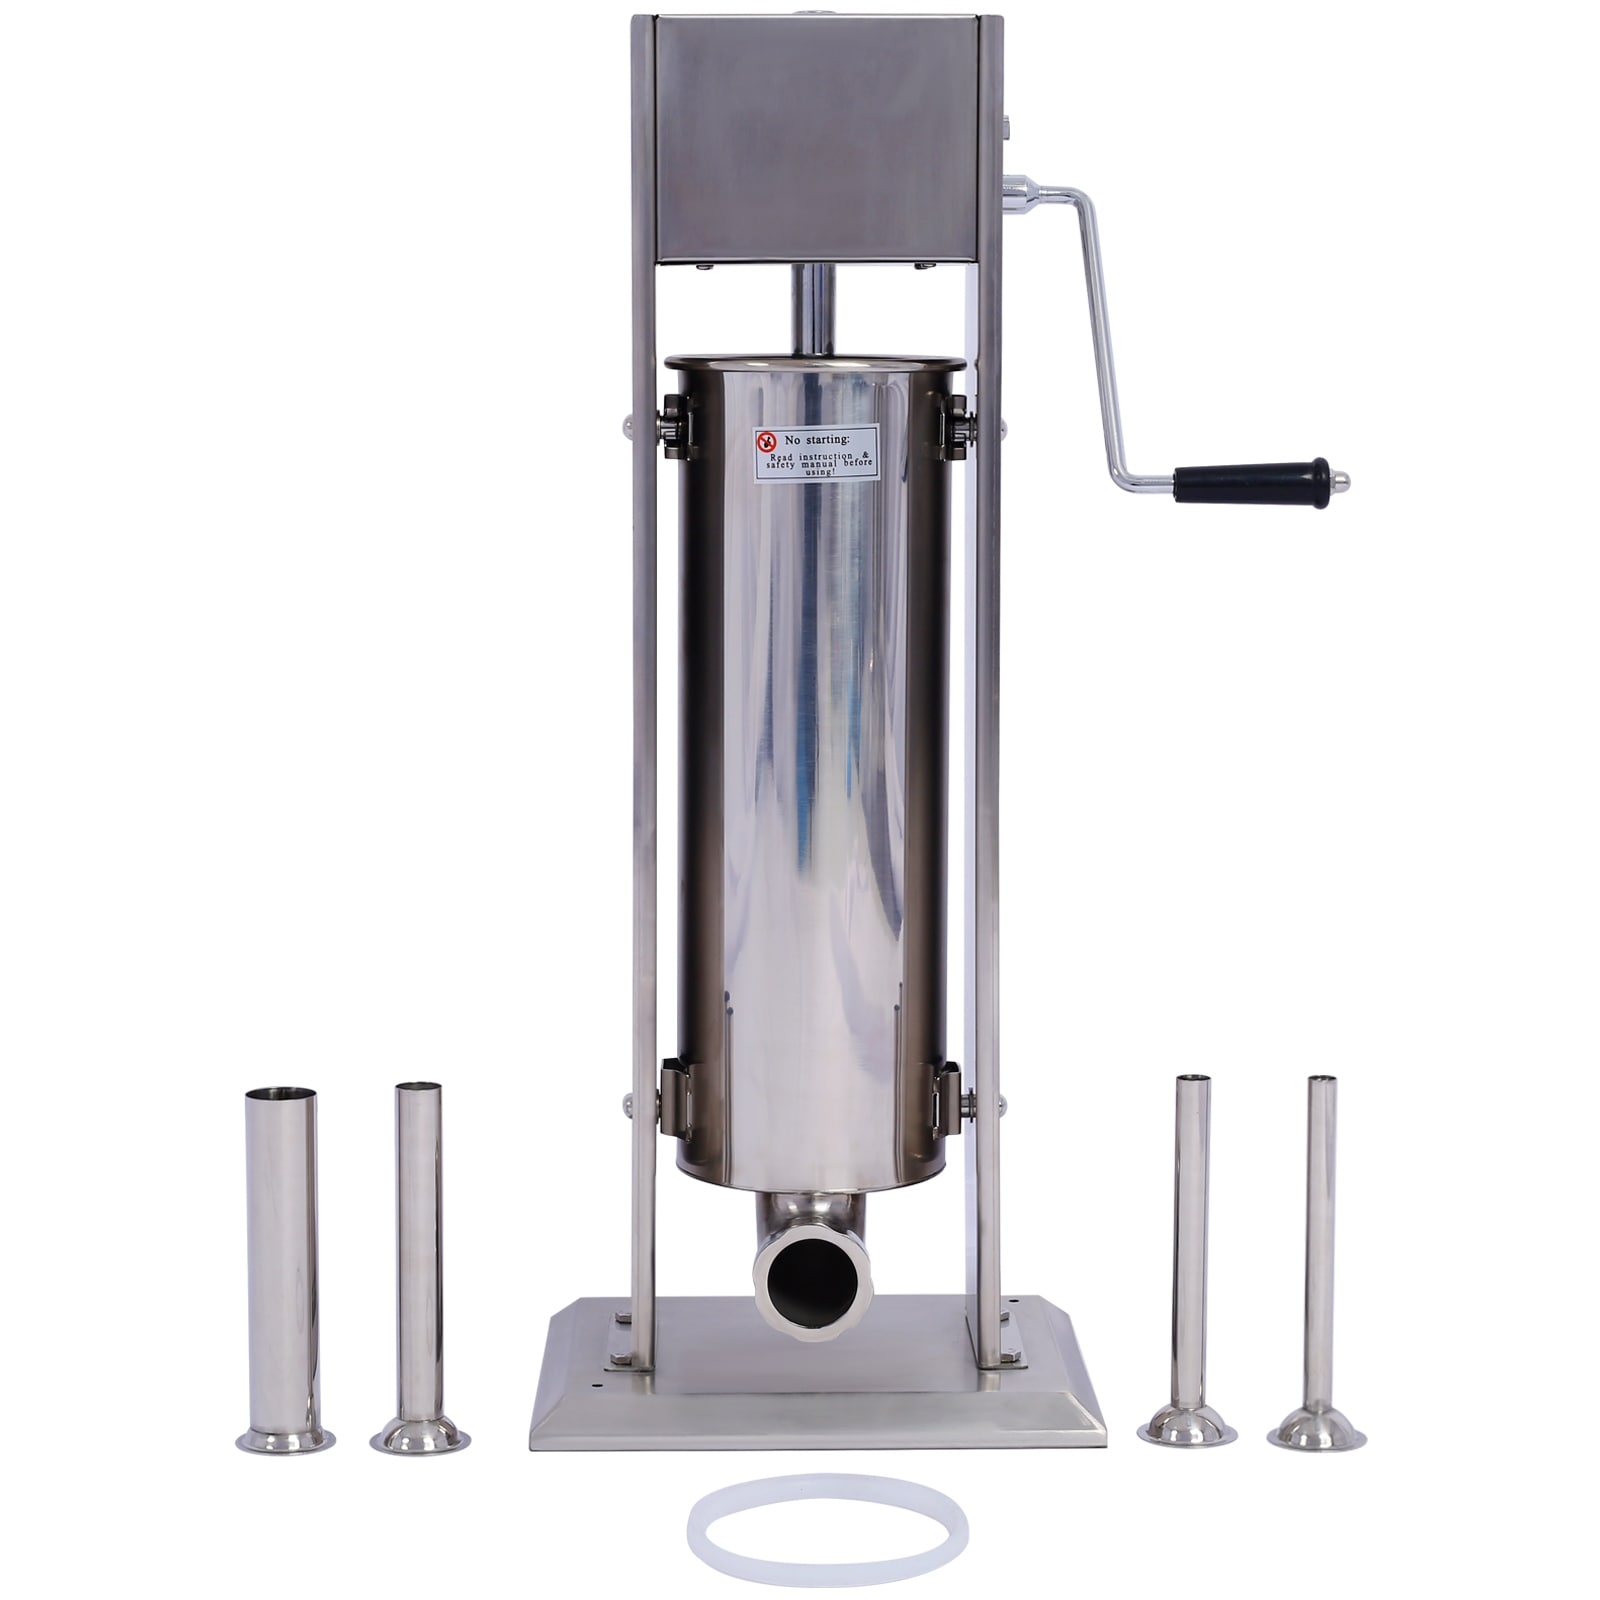 0.8-Gallon Stainless Steel Commercial Dual Speed Vertical Sausage Maker Meat Filler with 4 Stuffing Tubes